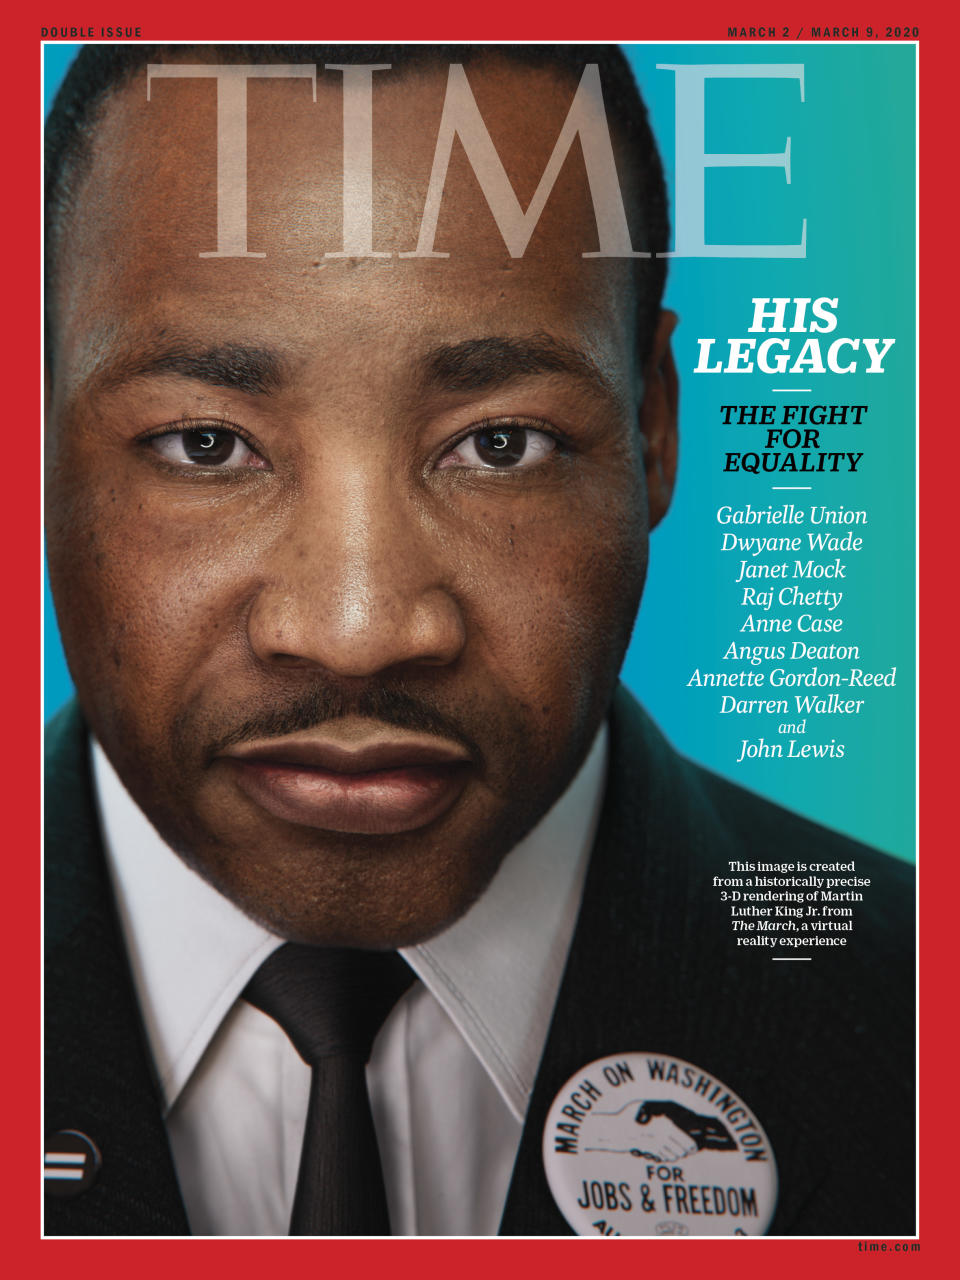 This image is created from a historically precise 3-D rendering of Martin Luther King Jr. from The March, a virtual reality experience | Portrait for TIME by Hank Willis Thomas and Digital Domain